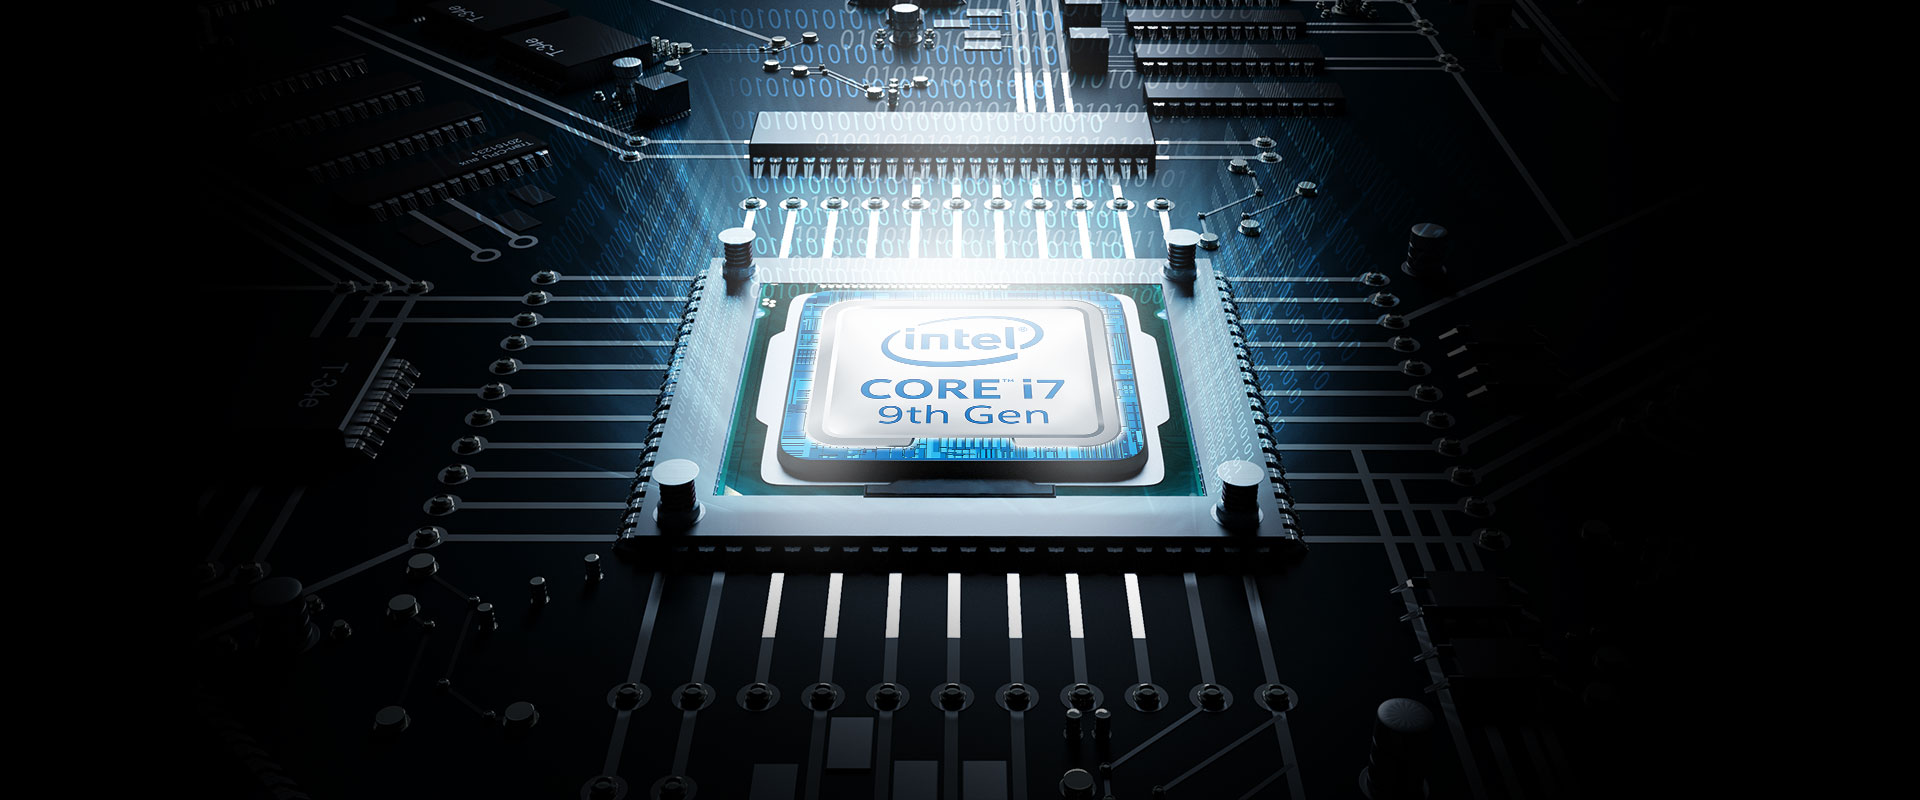 The 9th Gen Intel Core i7 CPU installed.